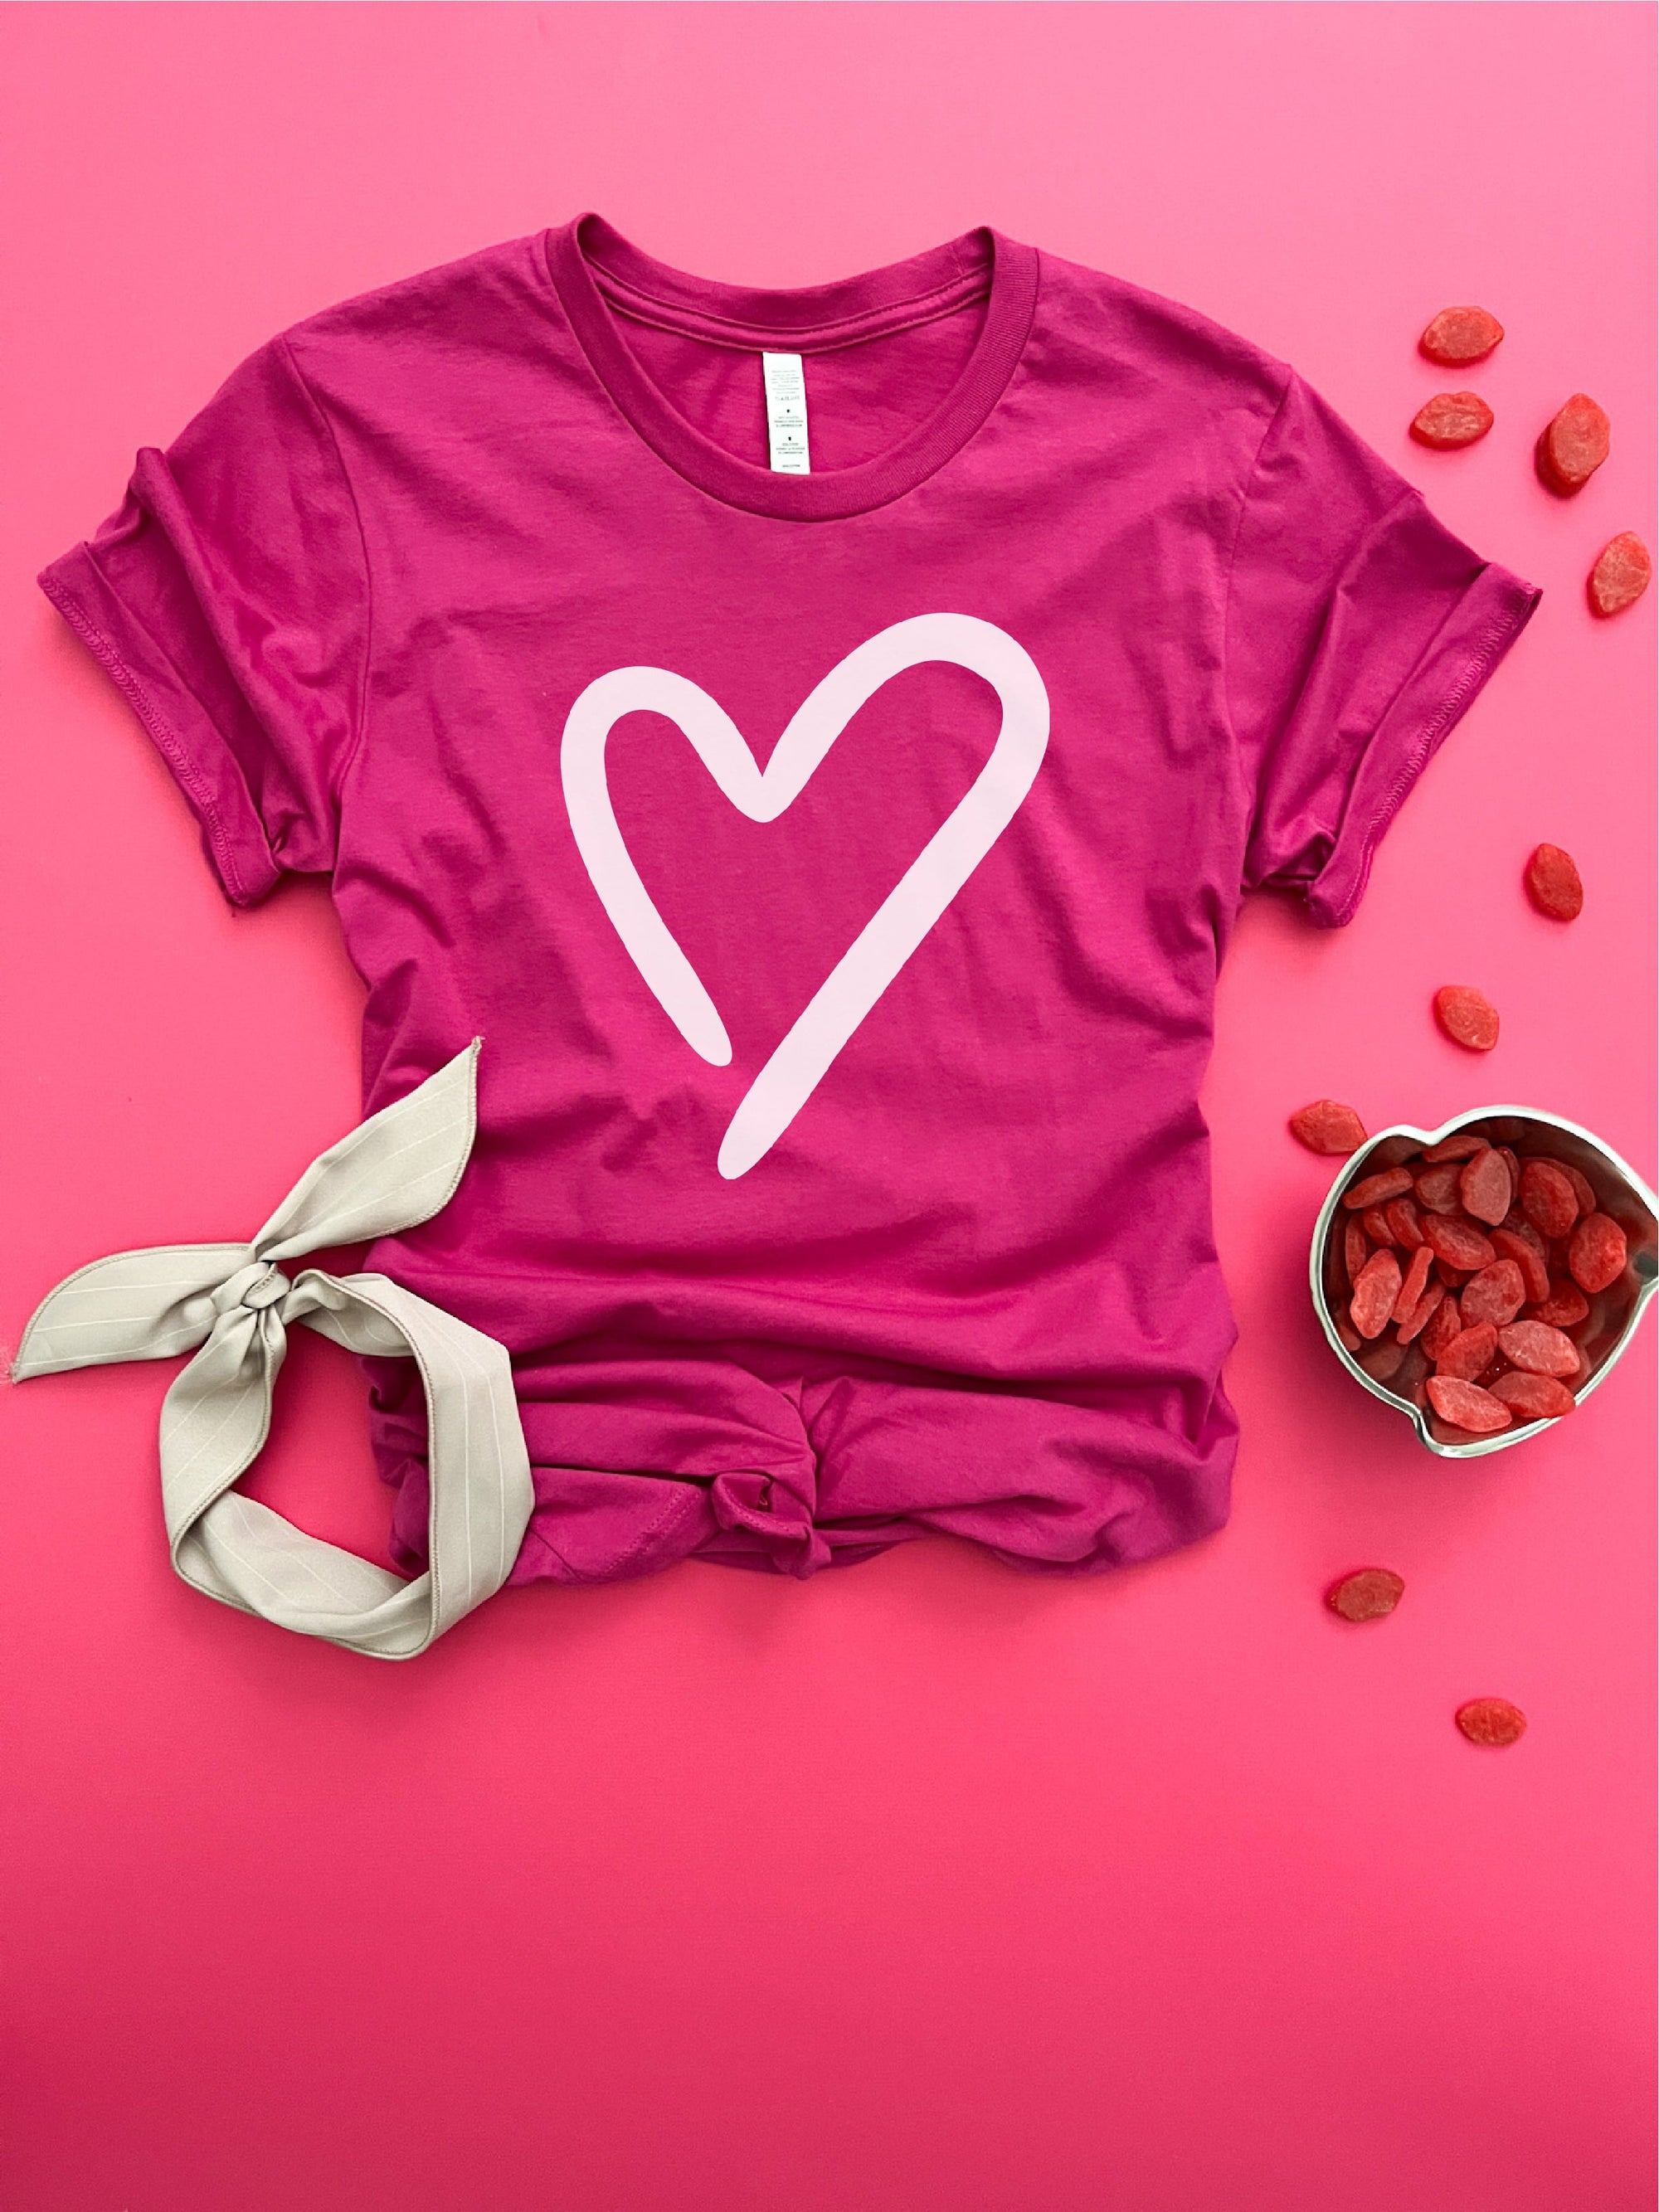 Heart tee Short sleeve valentines day tee Bella canvas 3001 XS Berry 